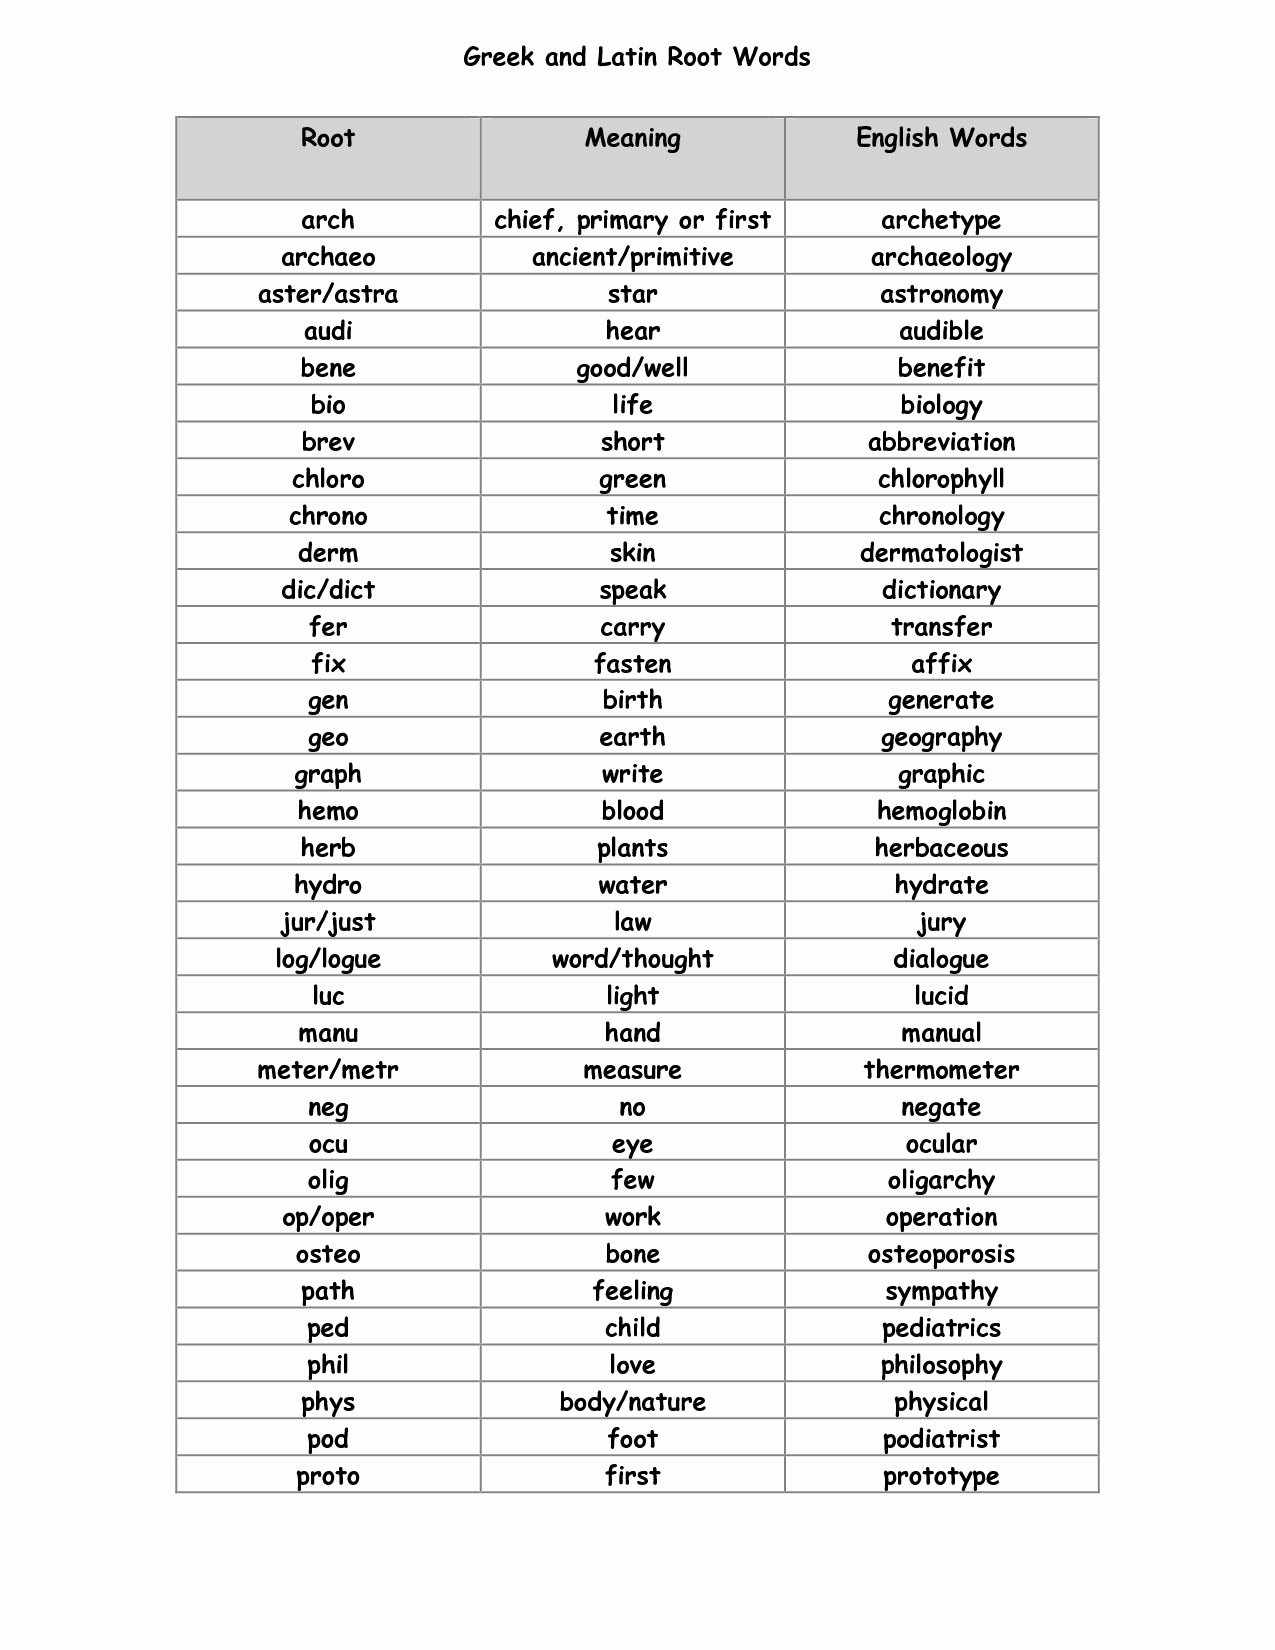 Greek and Latin Roots Worksheet Lovely Greek and Latin Roots Worksheet Pdf